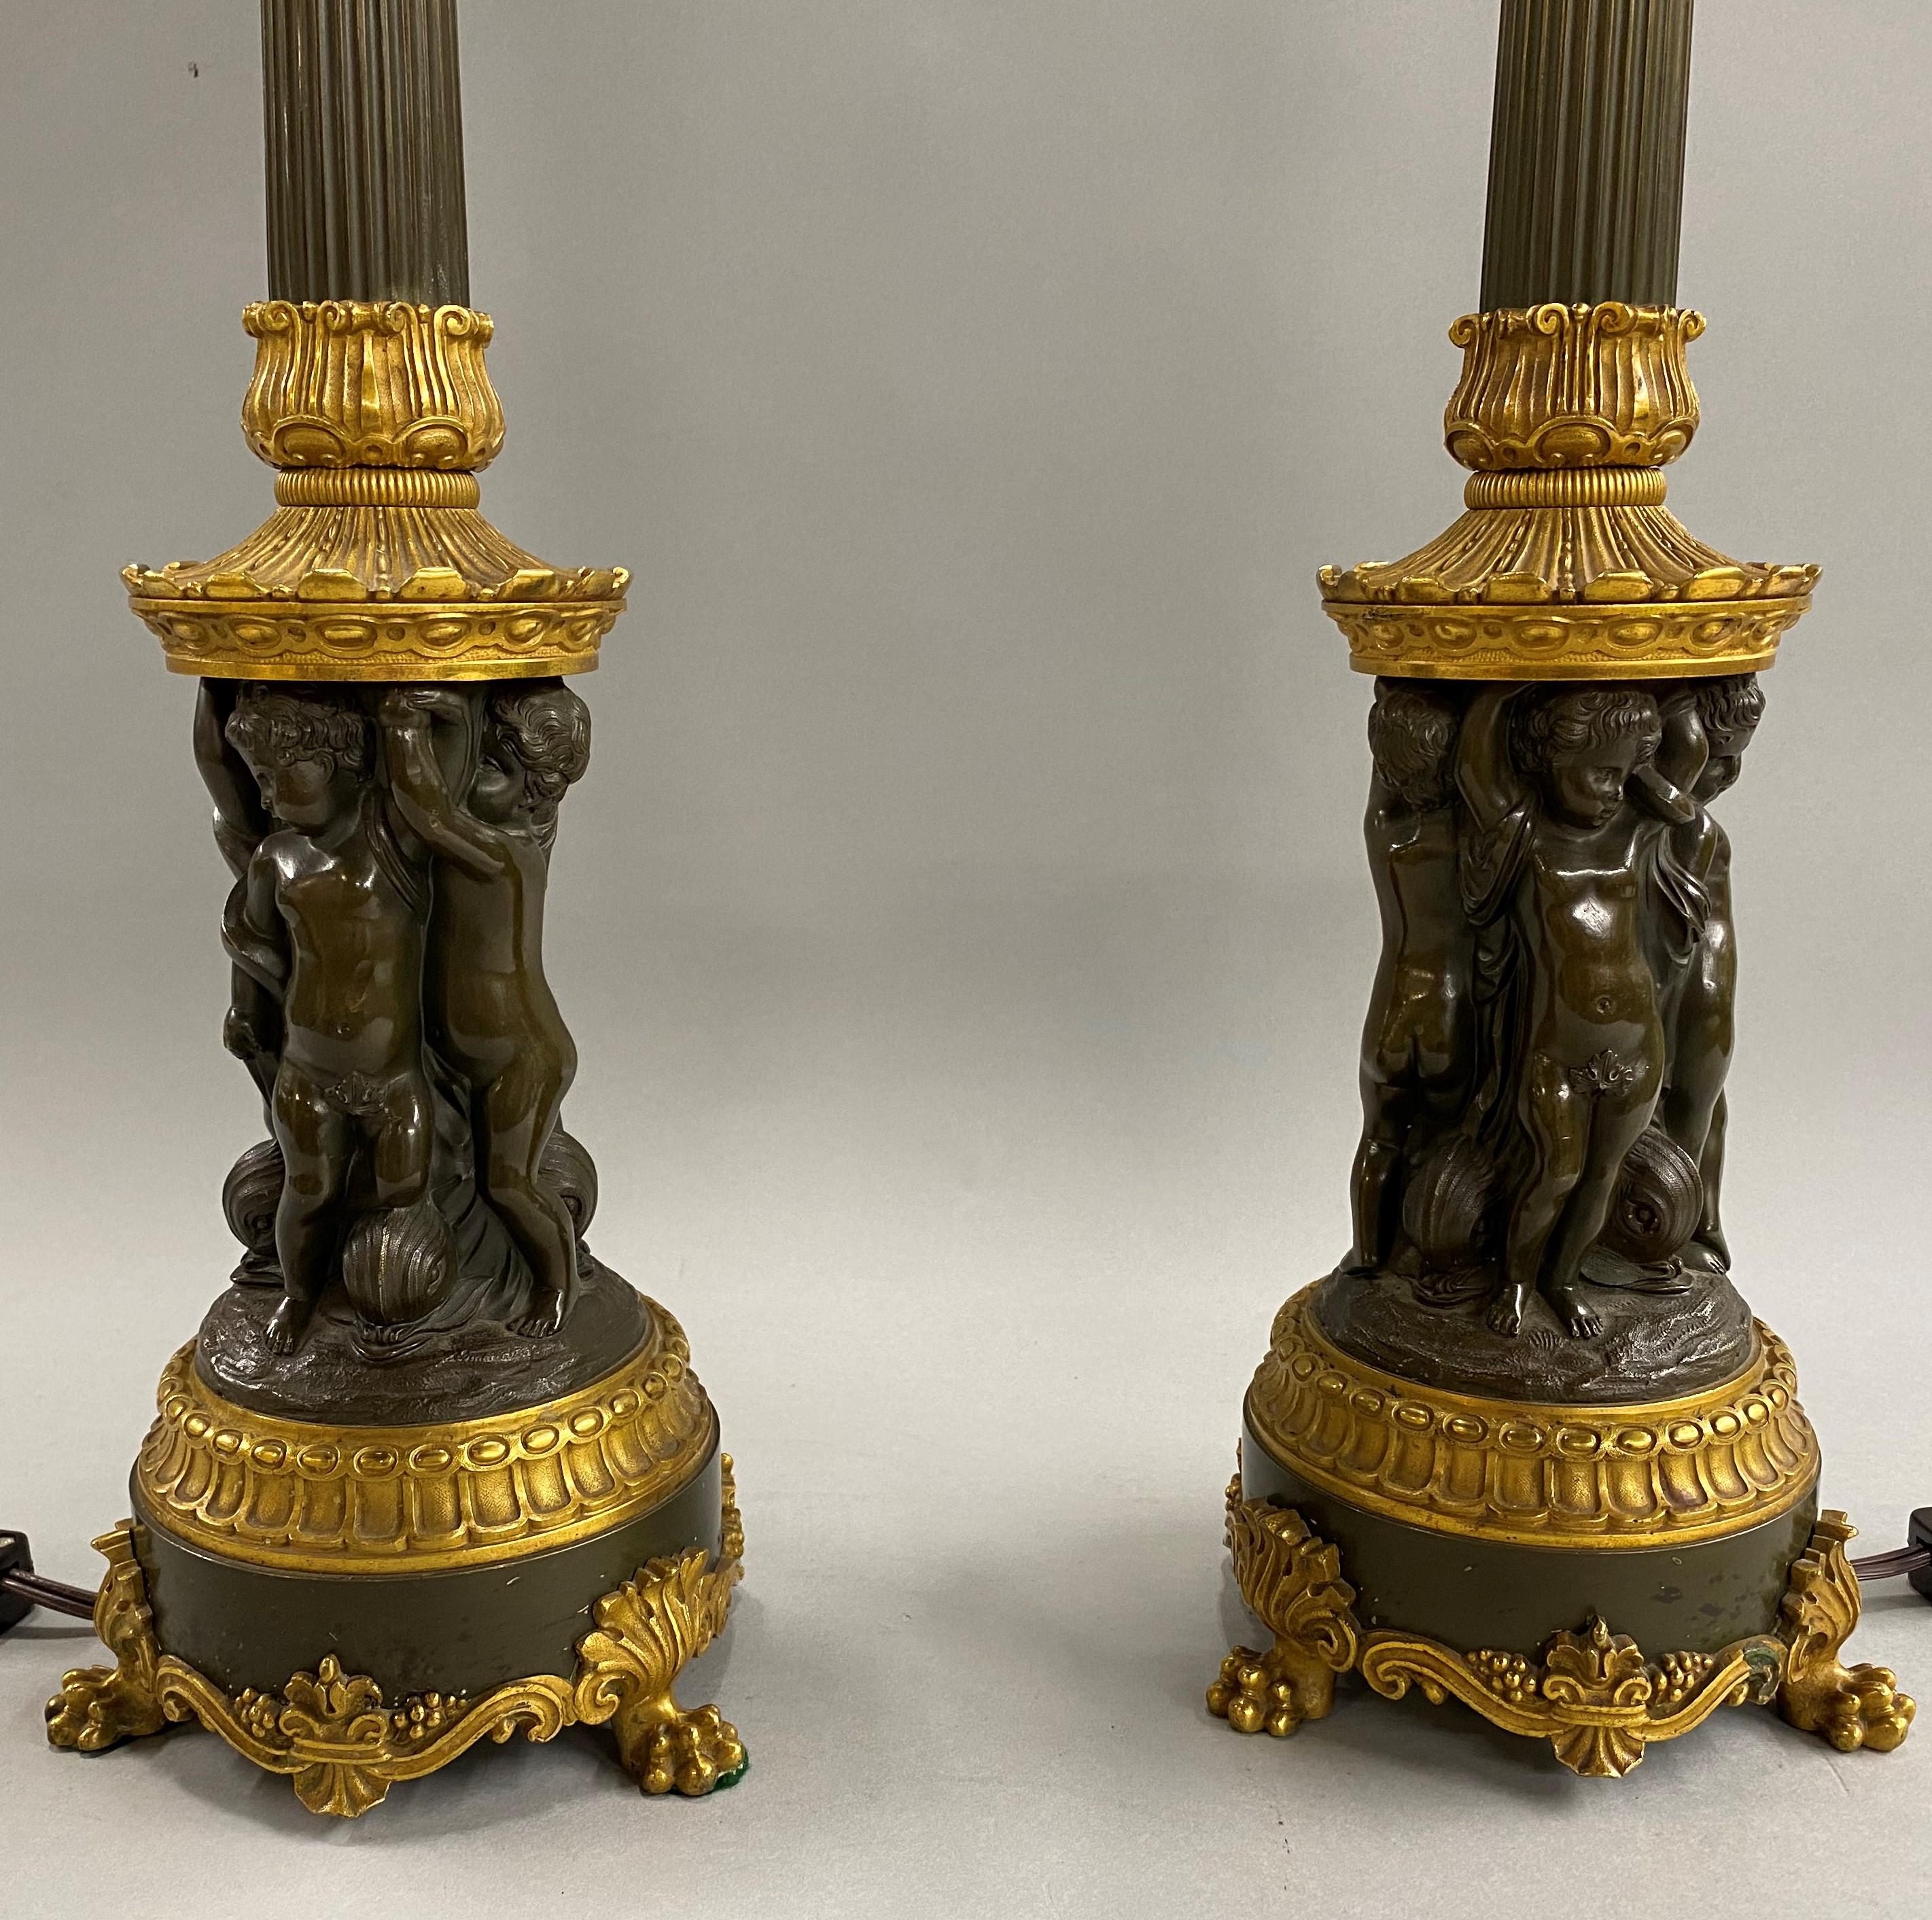 20th Century Pair of Continental Gilt and Bronze Five-Light Candelabra Lamps with Putti